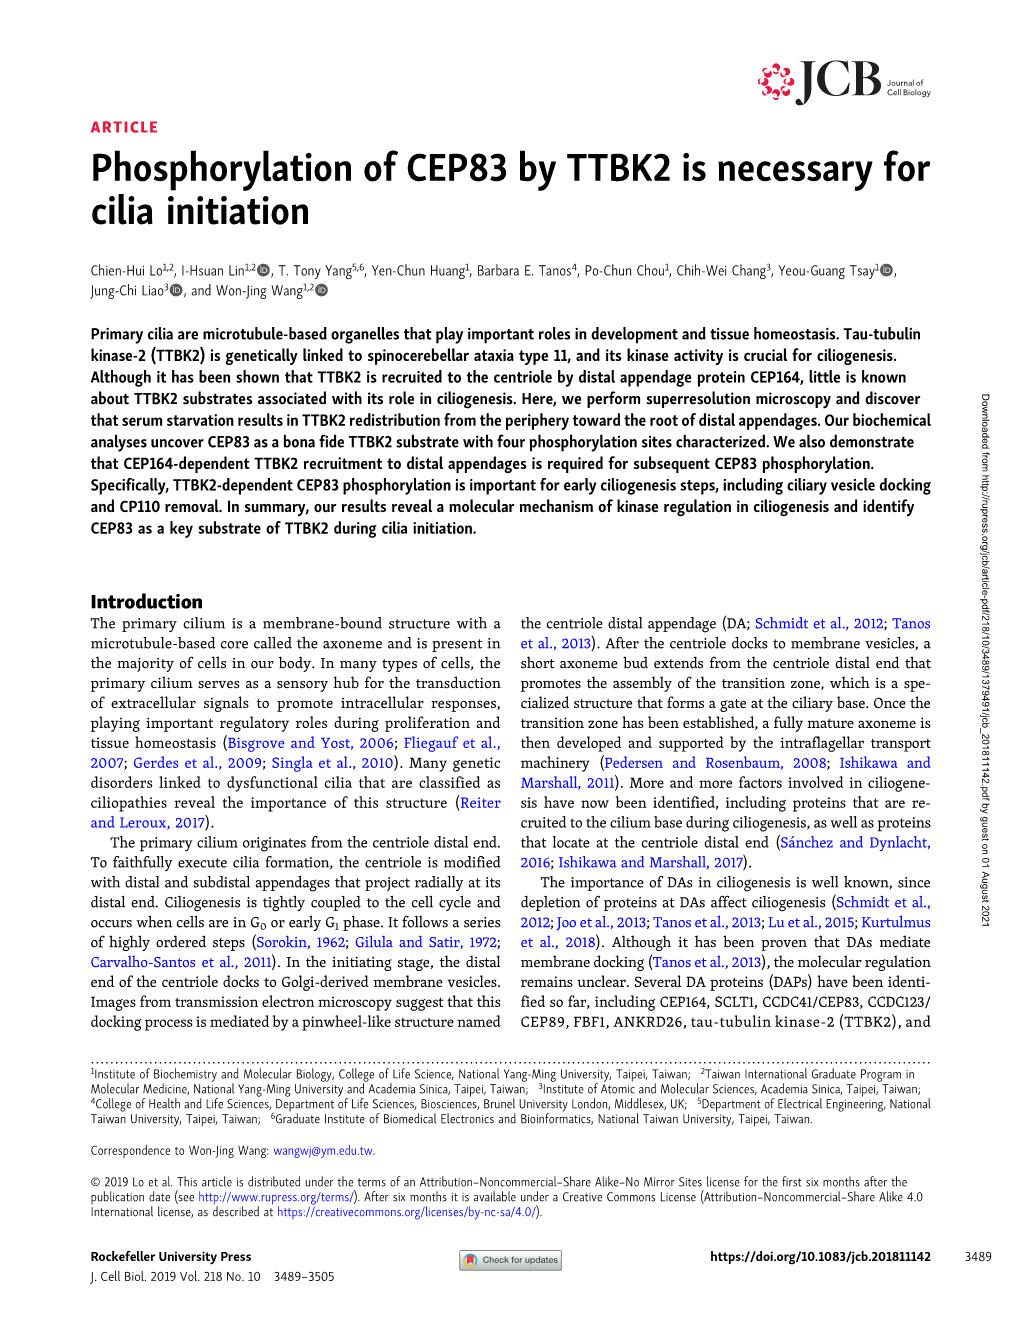 Phosphorylation of CEP83 by TTBK2 Is Necessary for Cilia Initiation